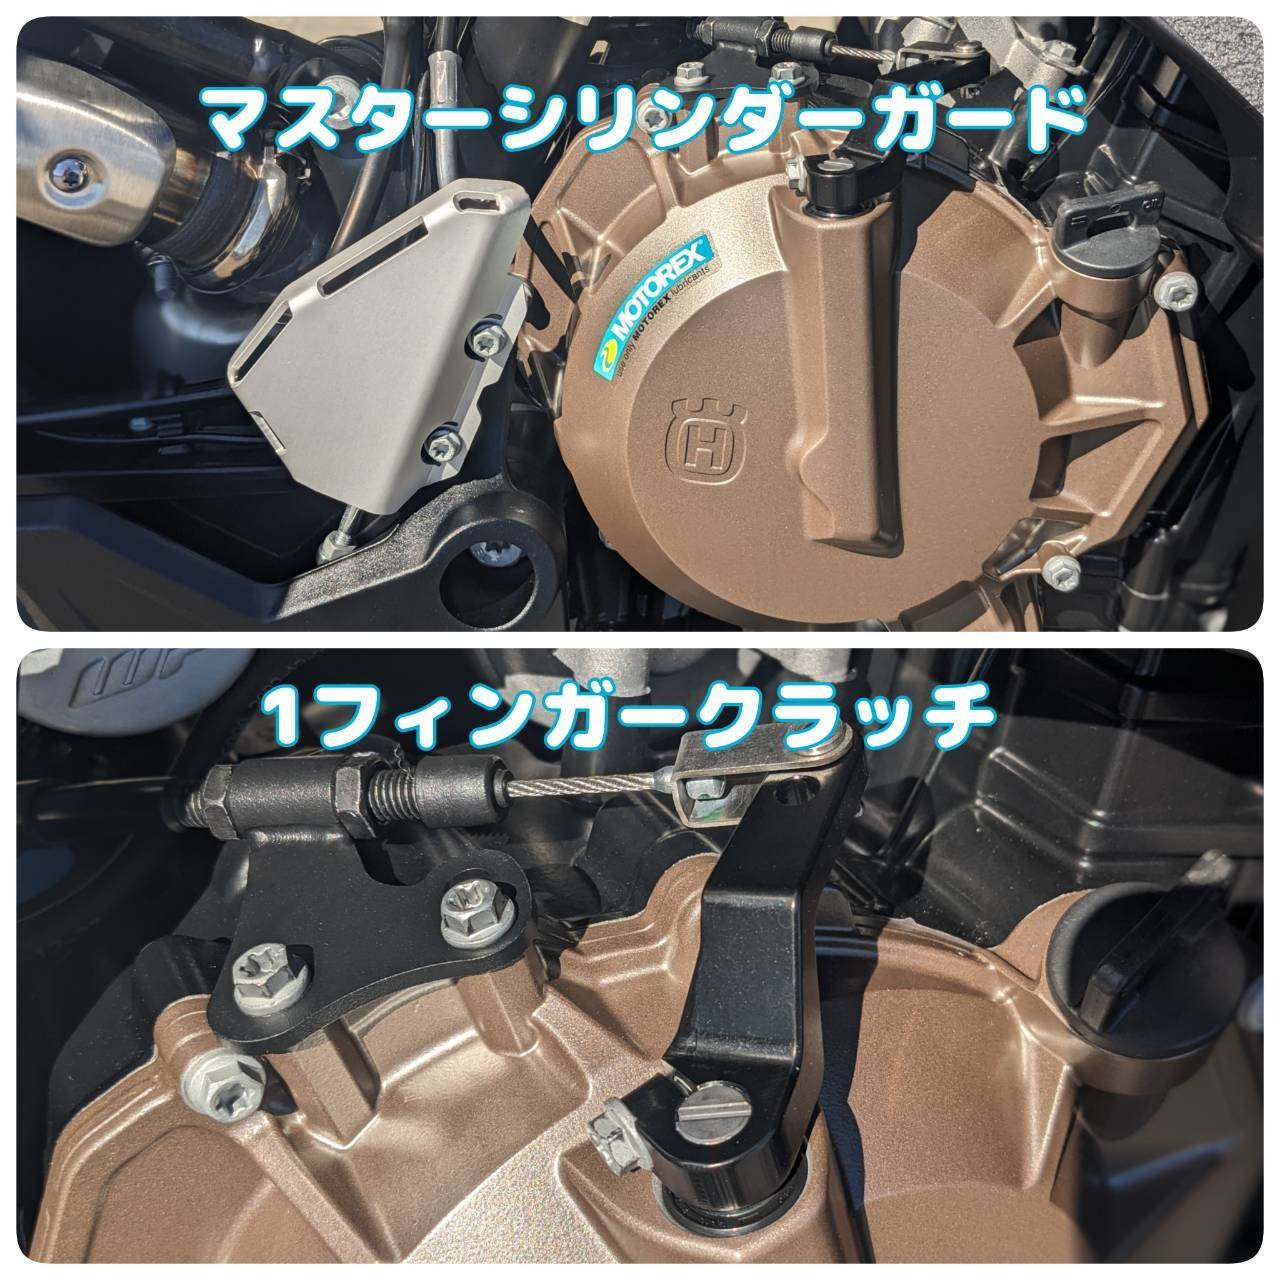 Norden901Expeditionカスタム紹介♪②　ハスクバーナモーターサイクルズ 山形